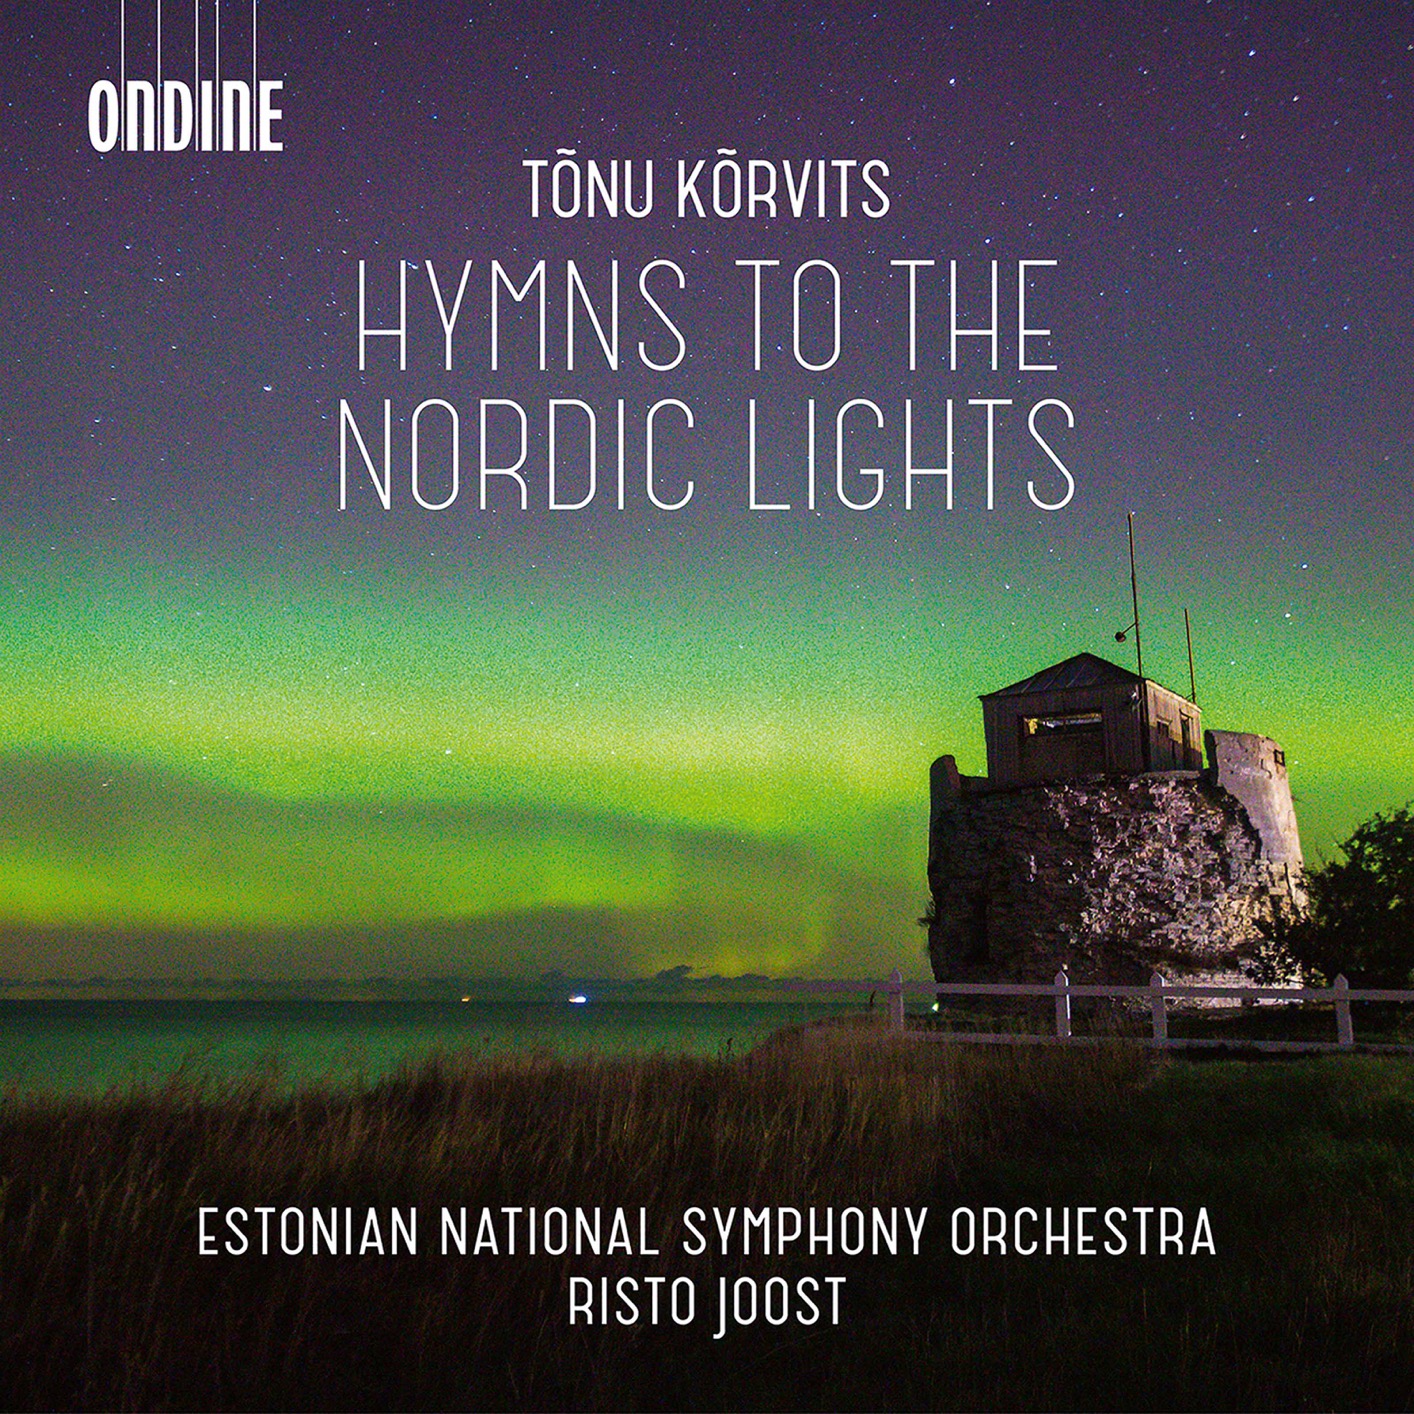 Estonian National Symphony Orchestra & Risto Joost – Tonu Korvits: Hymns to the Nordic Lights & Other Works (2020) [FLAC 24bit/48kHz]